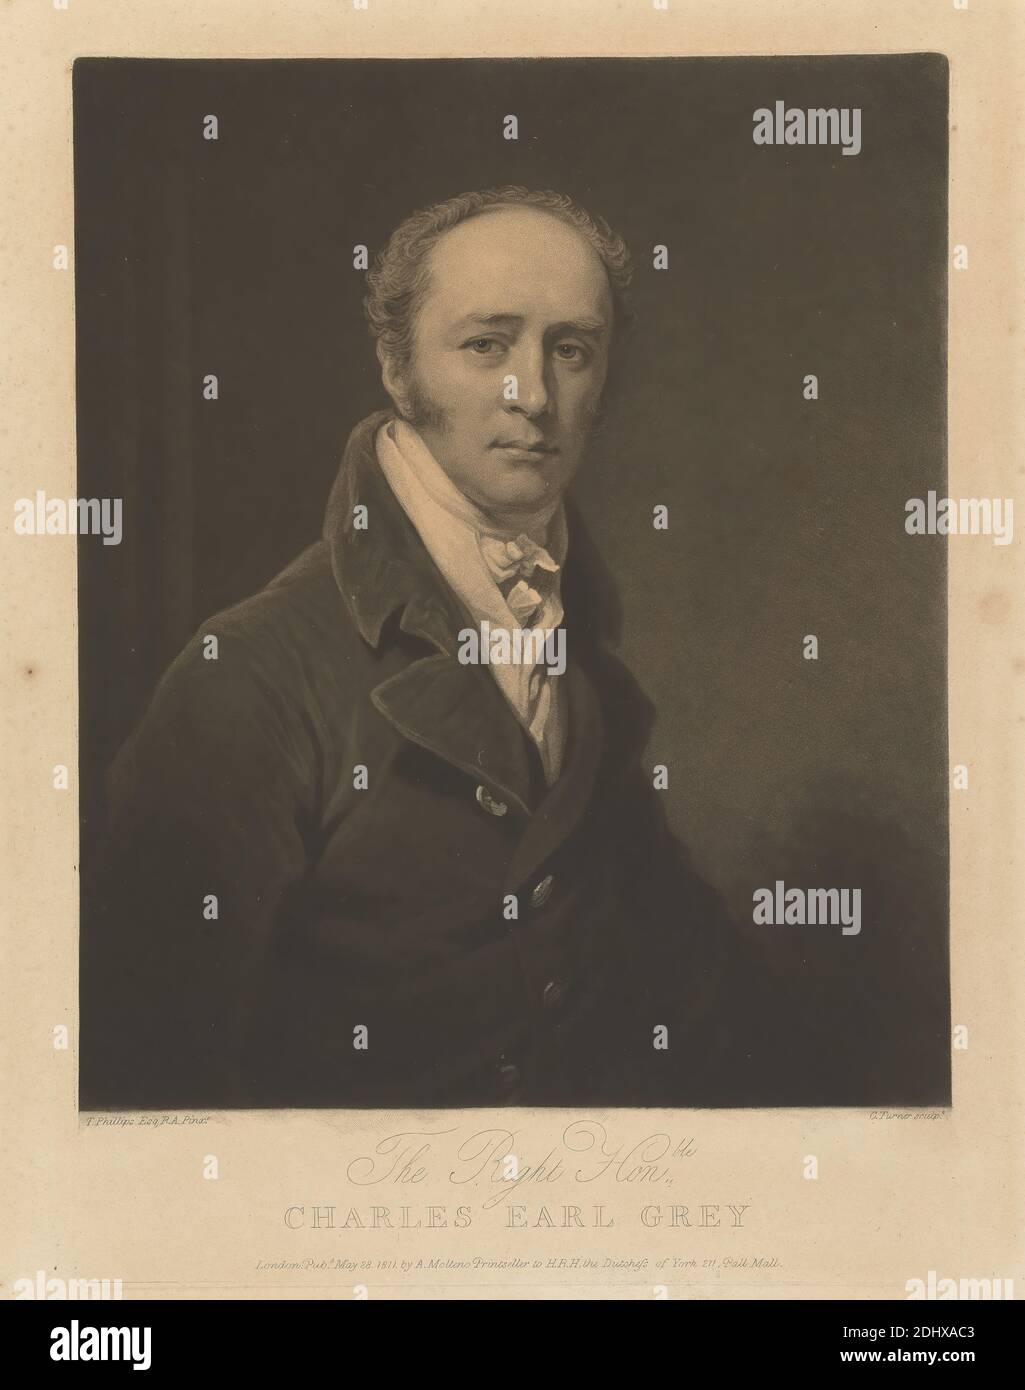 The Right Honourable Charles Earl Grey, Charles Turner, 1774–1857, British, after Thomas Phillips, 1770–1845, British, 1811, Mezzotint on moderately thick, moderately textured, beige, wove paper, Sheet: 15 × 11 7/8 inches (38.1 × 30.2 cm), Plate: 14 × 10 inches (35.6 × 25.4 cm), and Image: 12 × 9 15/16 inches (30.5 × 25.2 cm Stock Photo